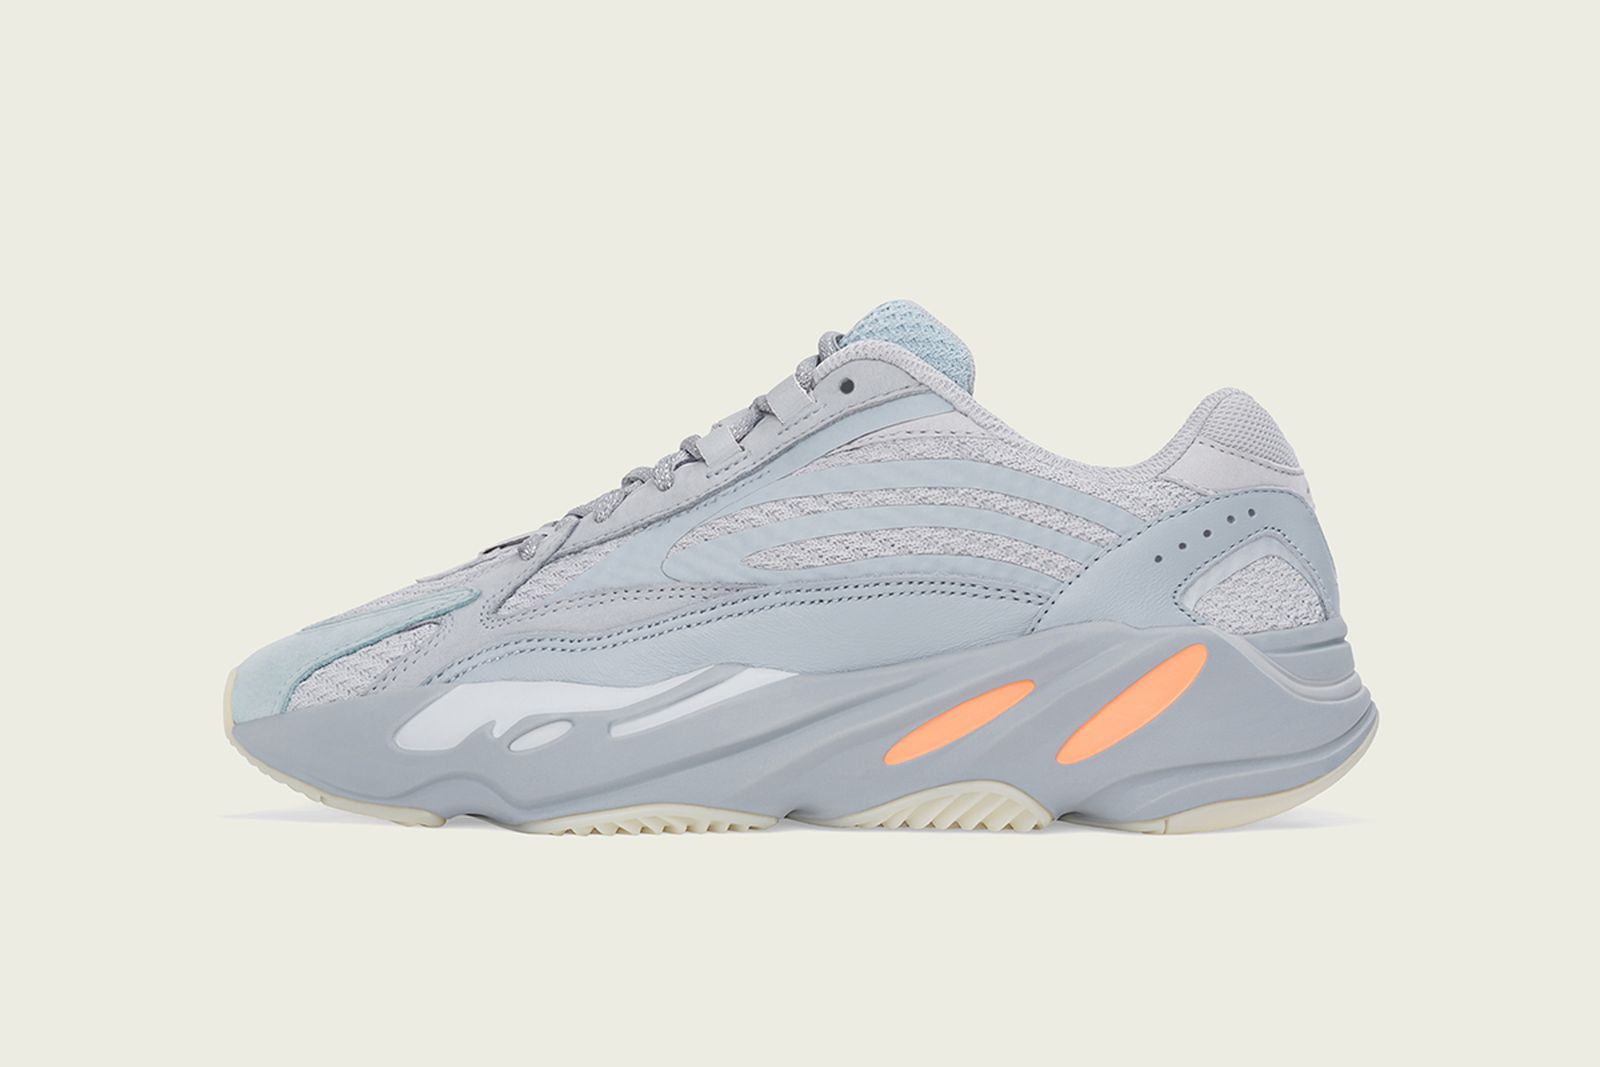 adidas yeezy boost 700 v2 inertia release date price kanye west